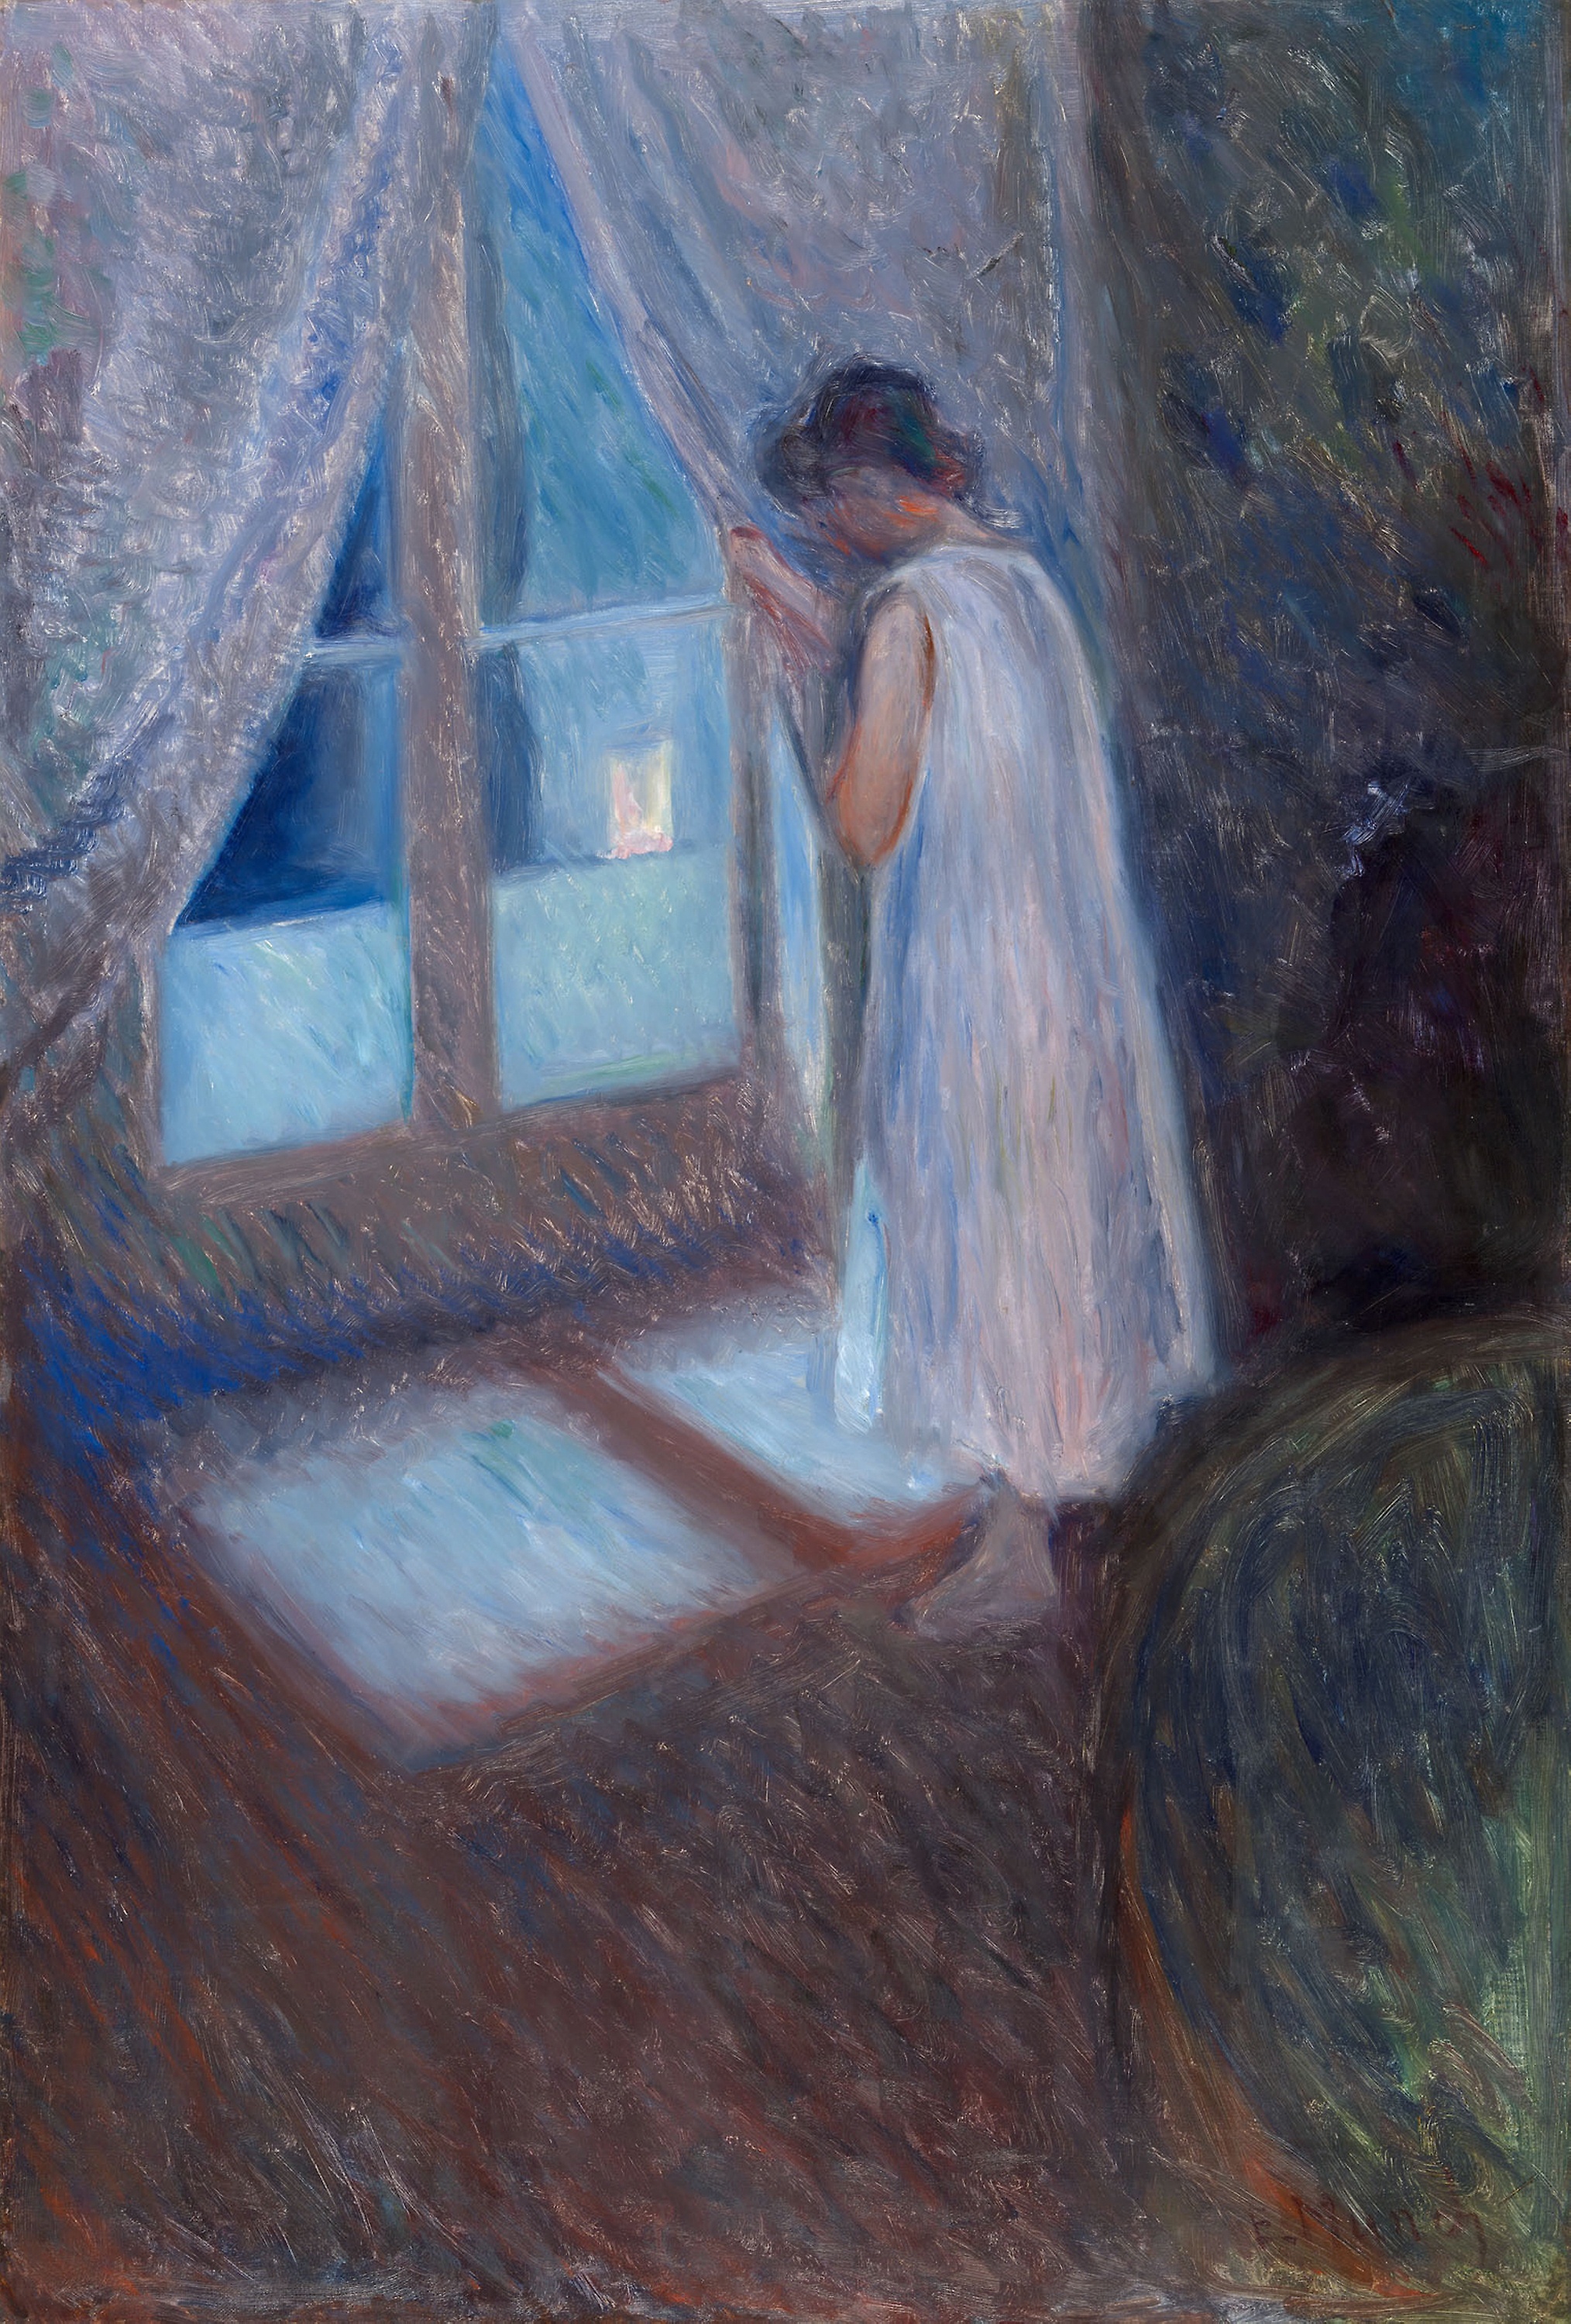 The Girl by the Window by Edvard Munch - 1893 - 96.5 × 65.4 cm Art Institute of Chicago